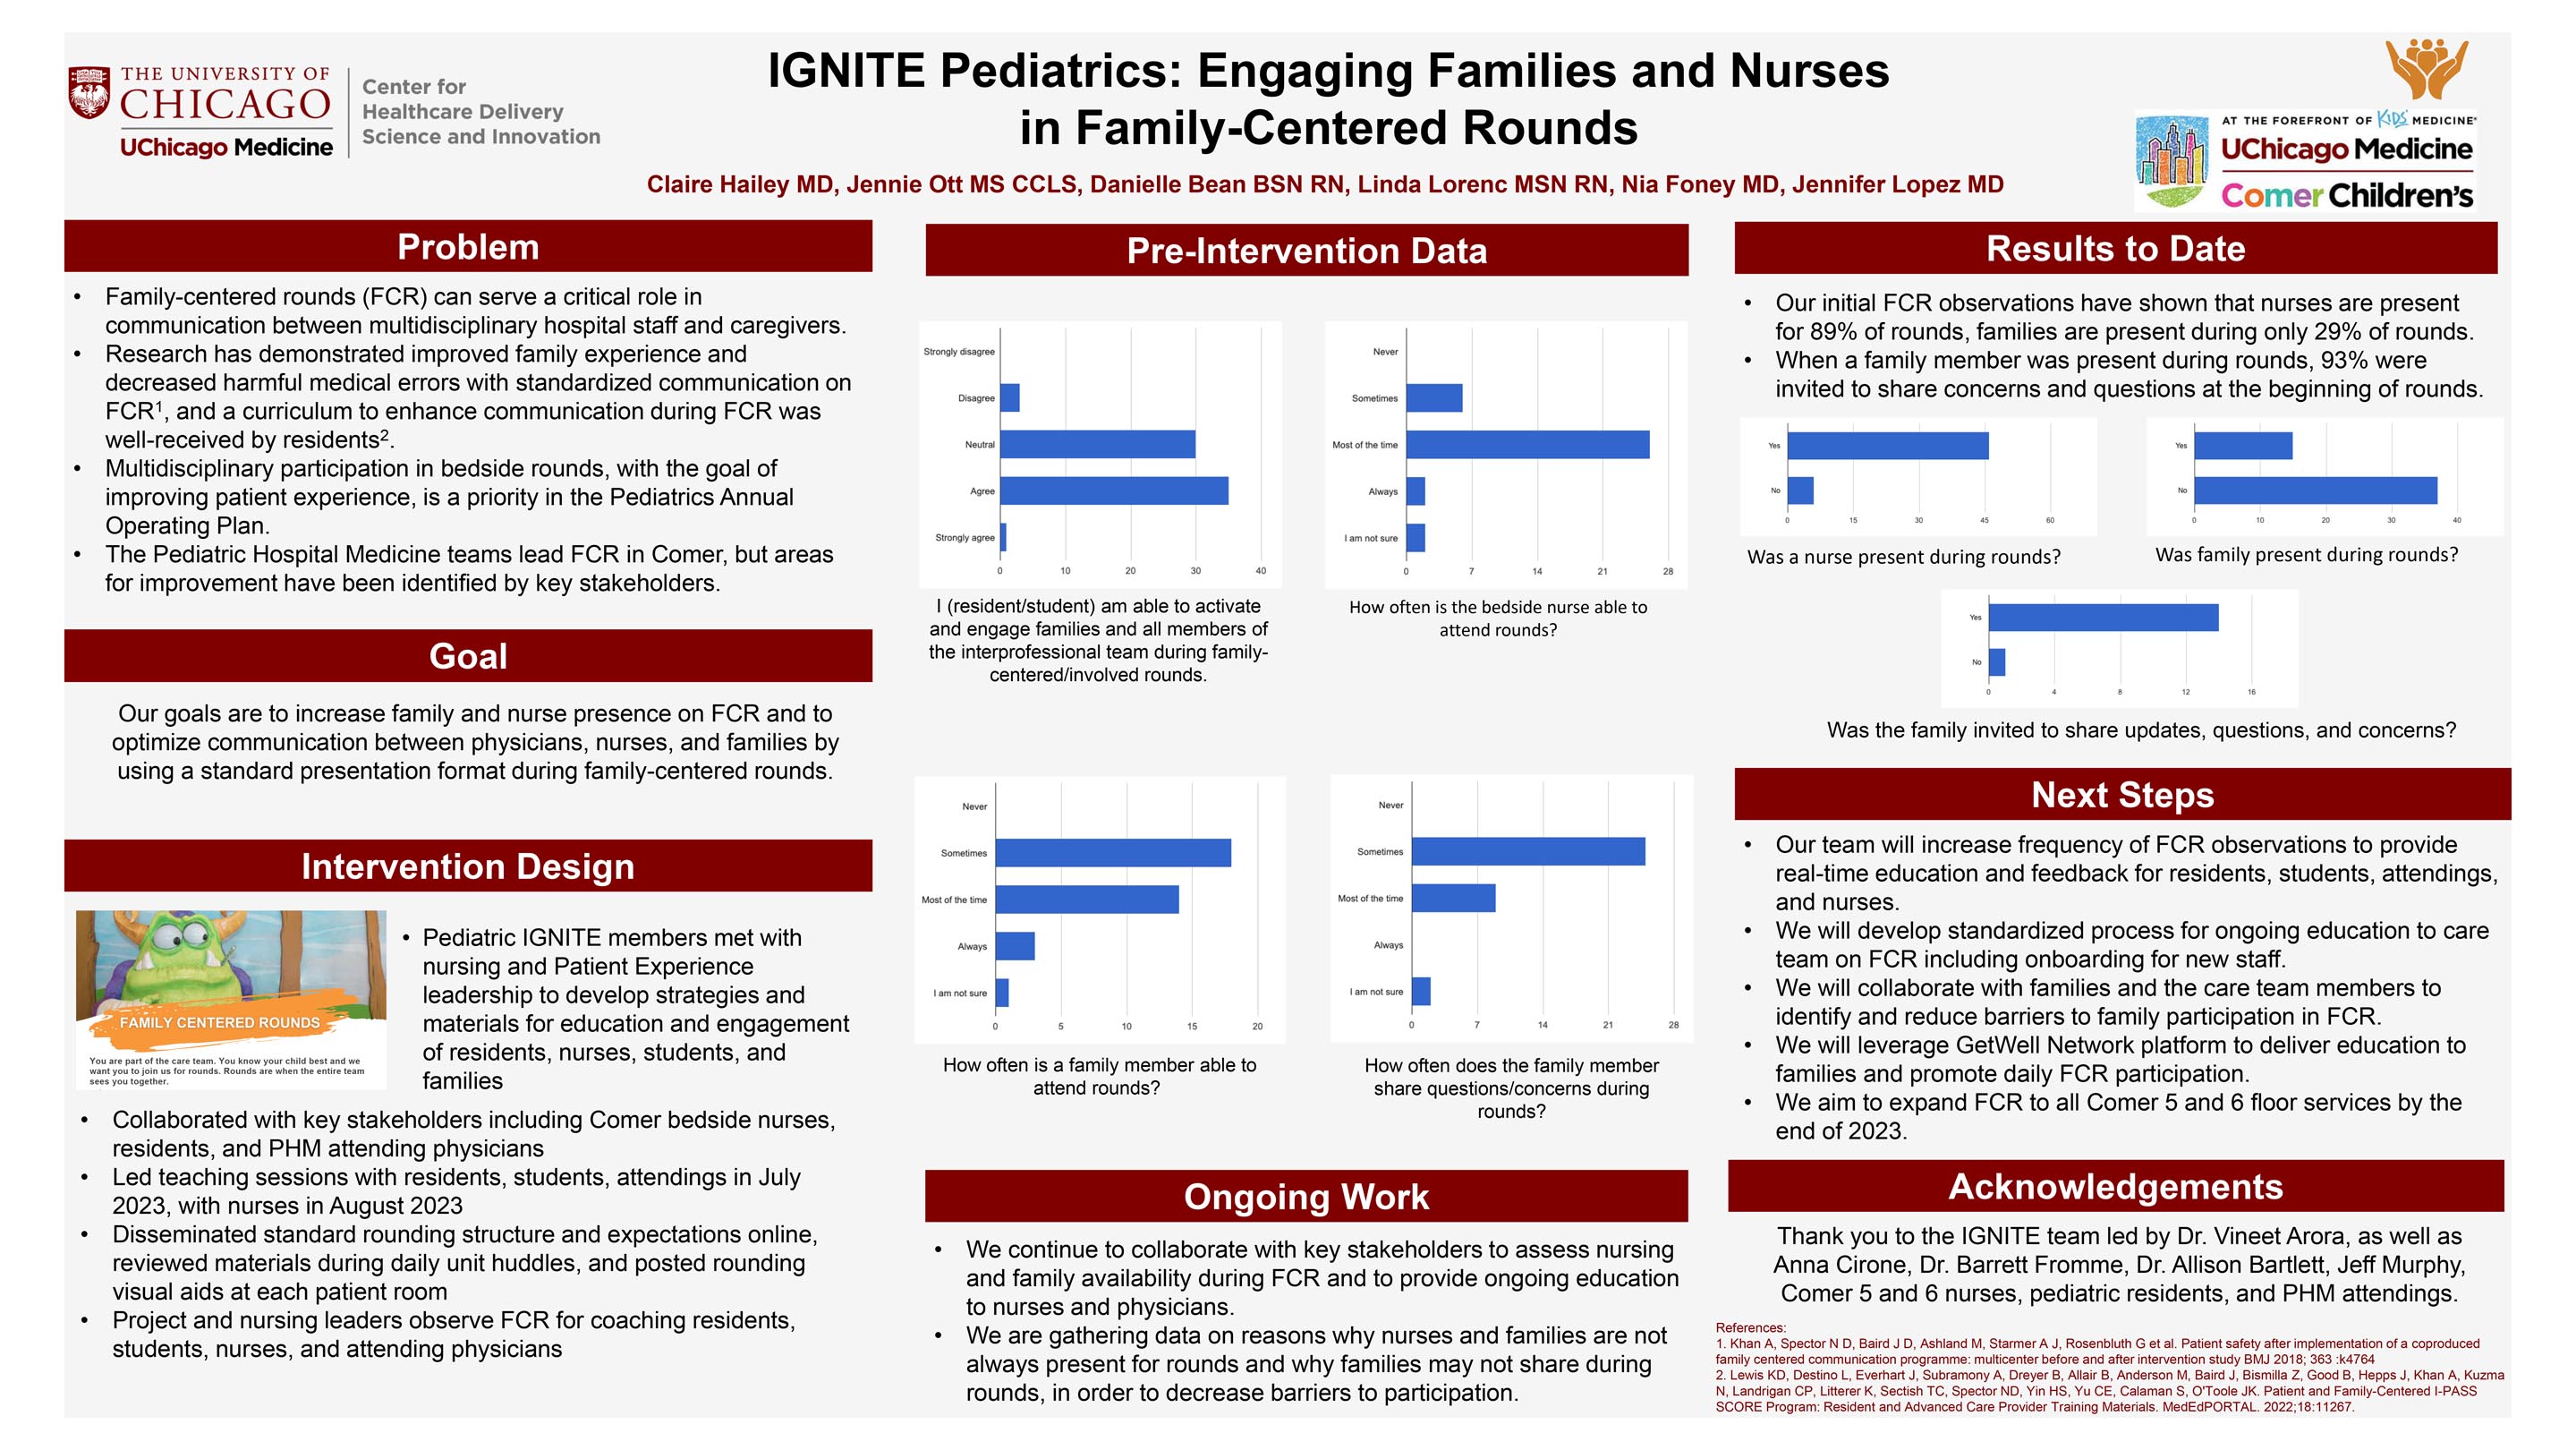 HAILEY_IGNITE Pediatrics- Engaging Families and Nurses in Family-Centered Rounds